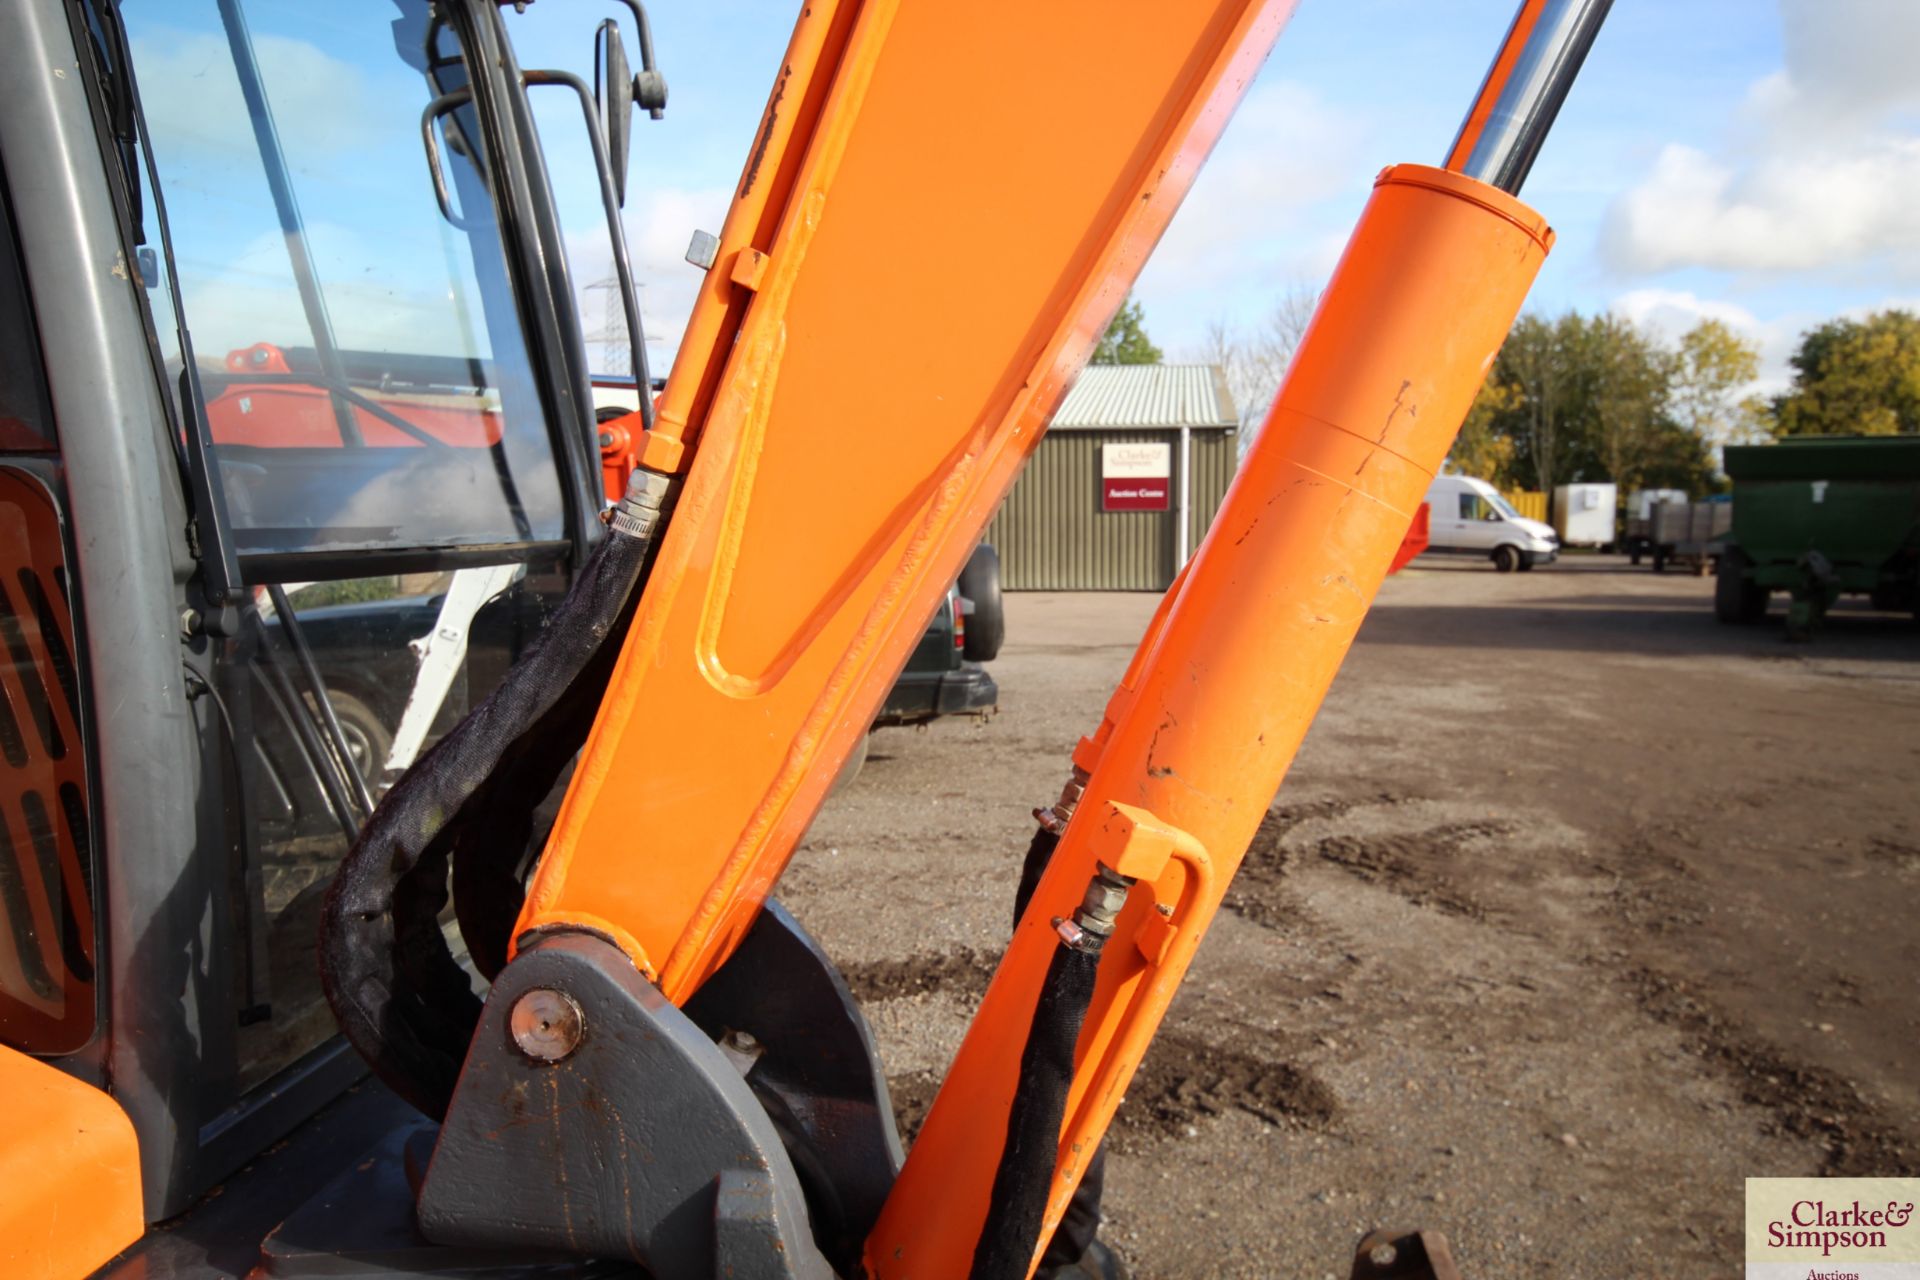 Doosan DX55E 5.5T excavator. 2011. 5,045 hours. Serial number 50461. With new rubber tracks 50 hours - Image 38 of 68